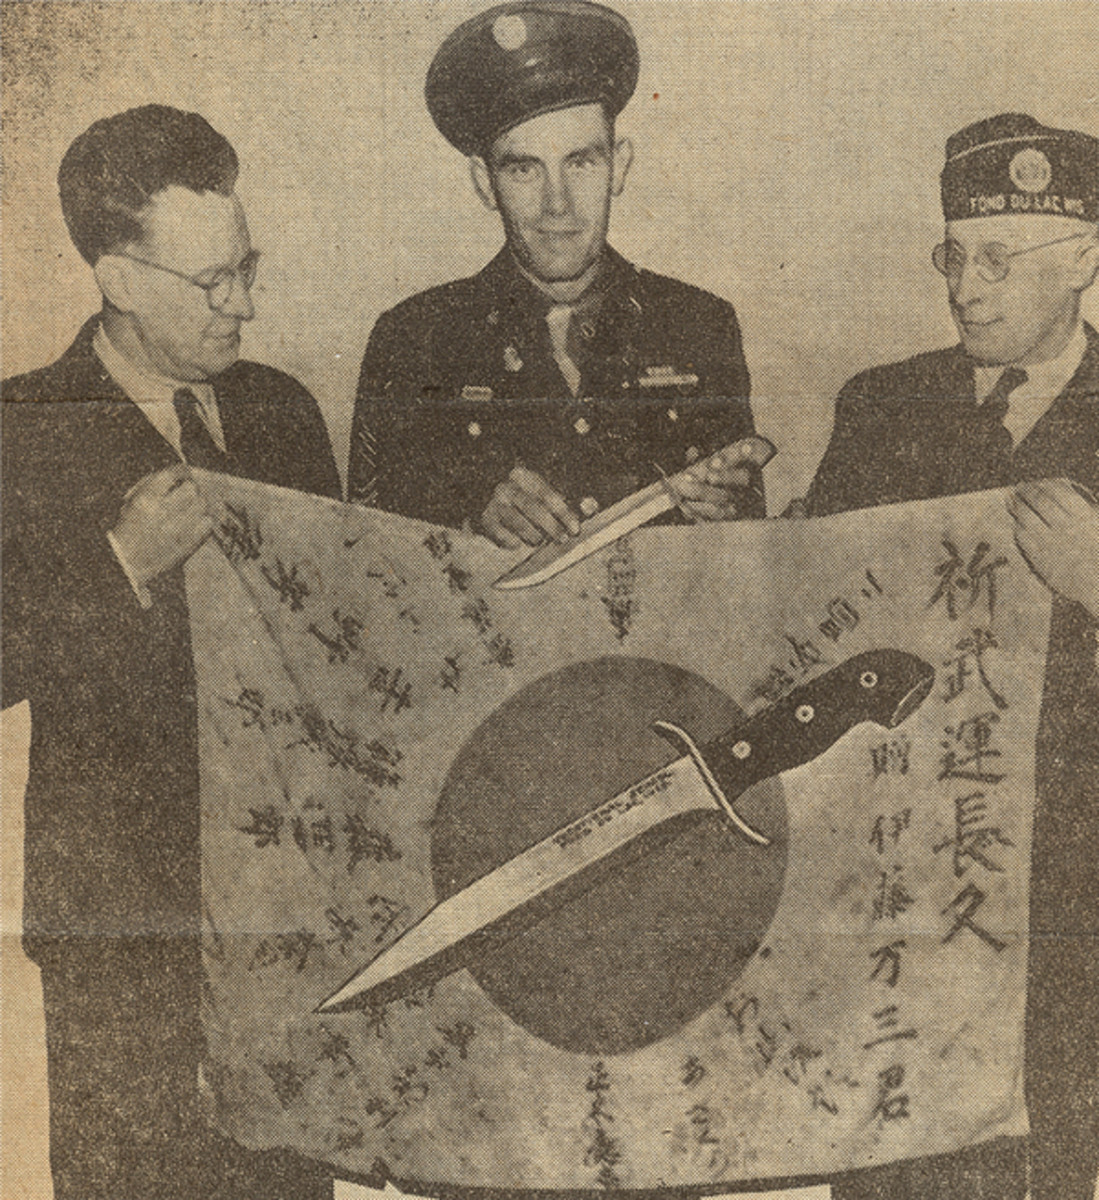 An old newspaper clipping shows Otto J. Dorr, then Director of the Fond du Lac Vocational School, Sgt. Jeske of the 32nd Division, and Clarence Fenner, Commander of the American Legion post.